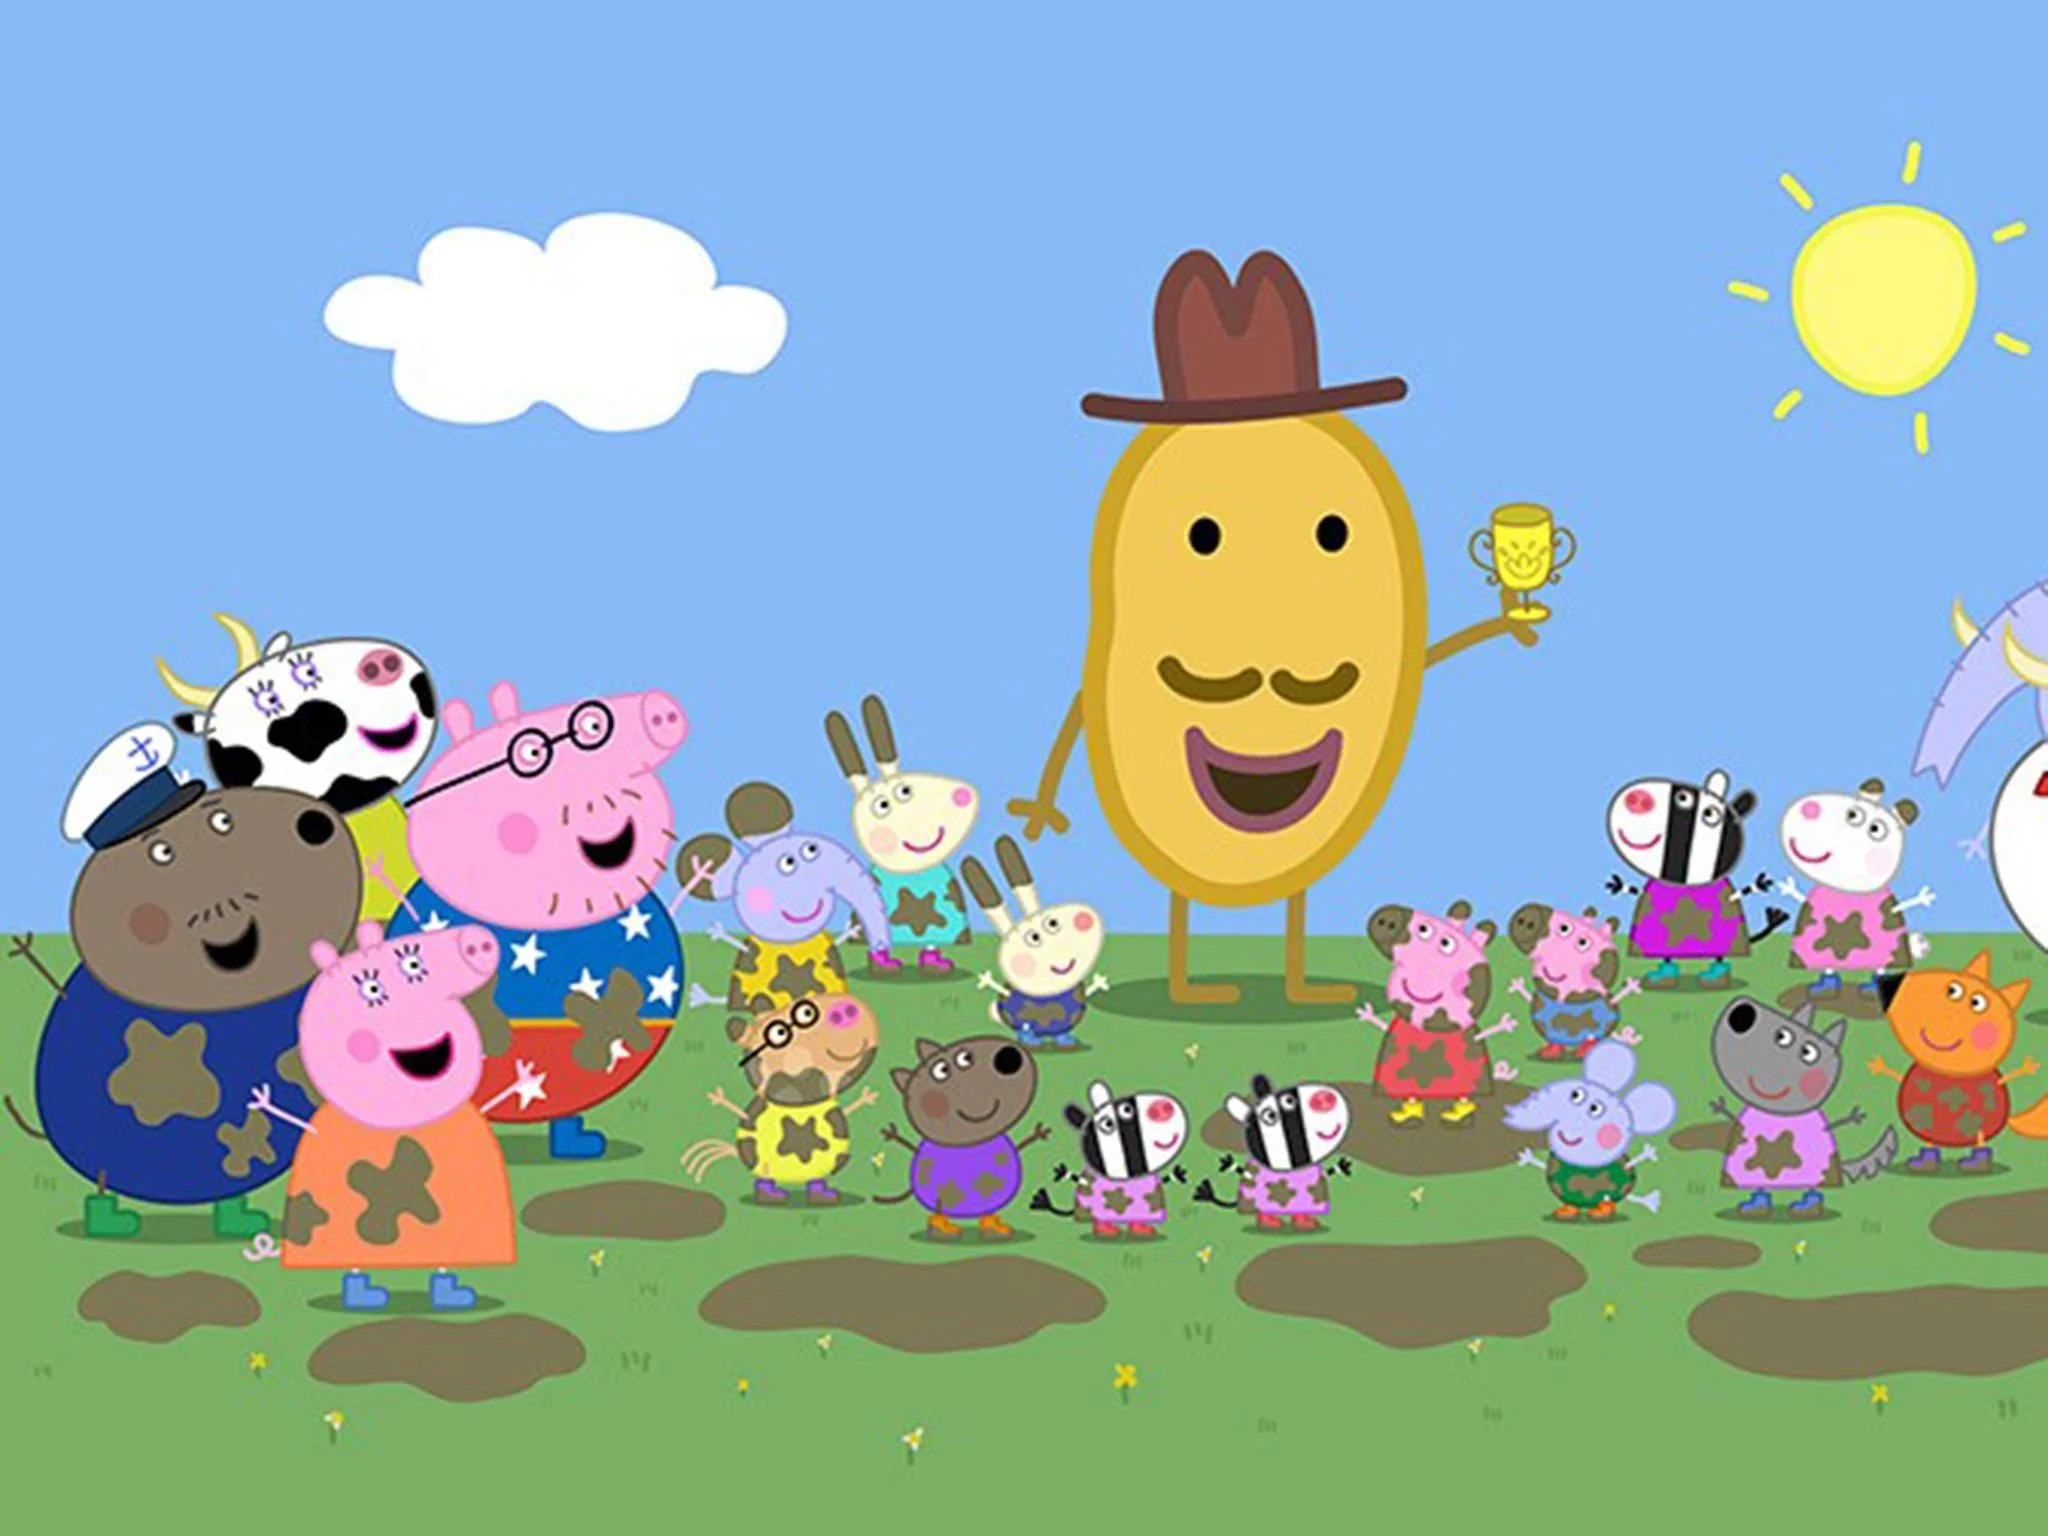 TV cartoon Peppa Pig now worth 1bn a year is making the leap